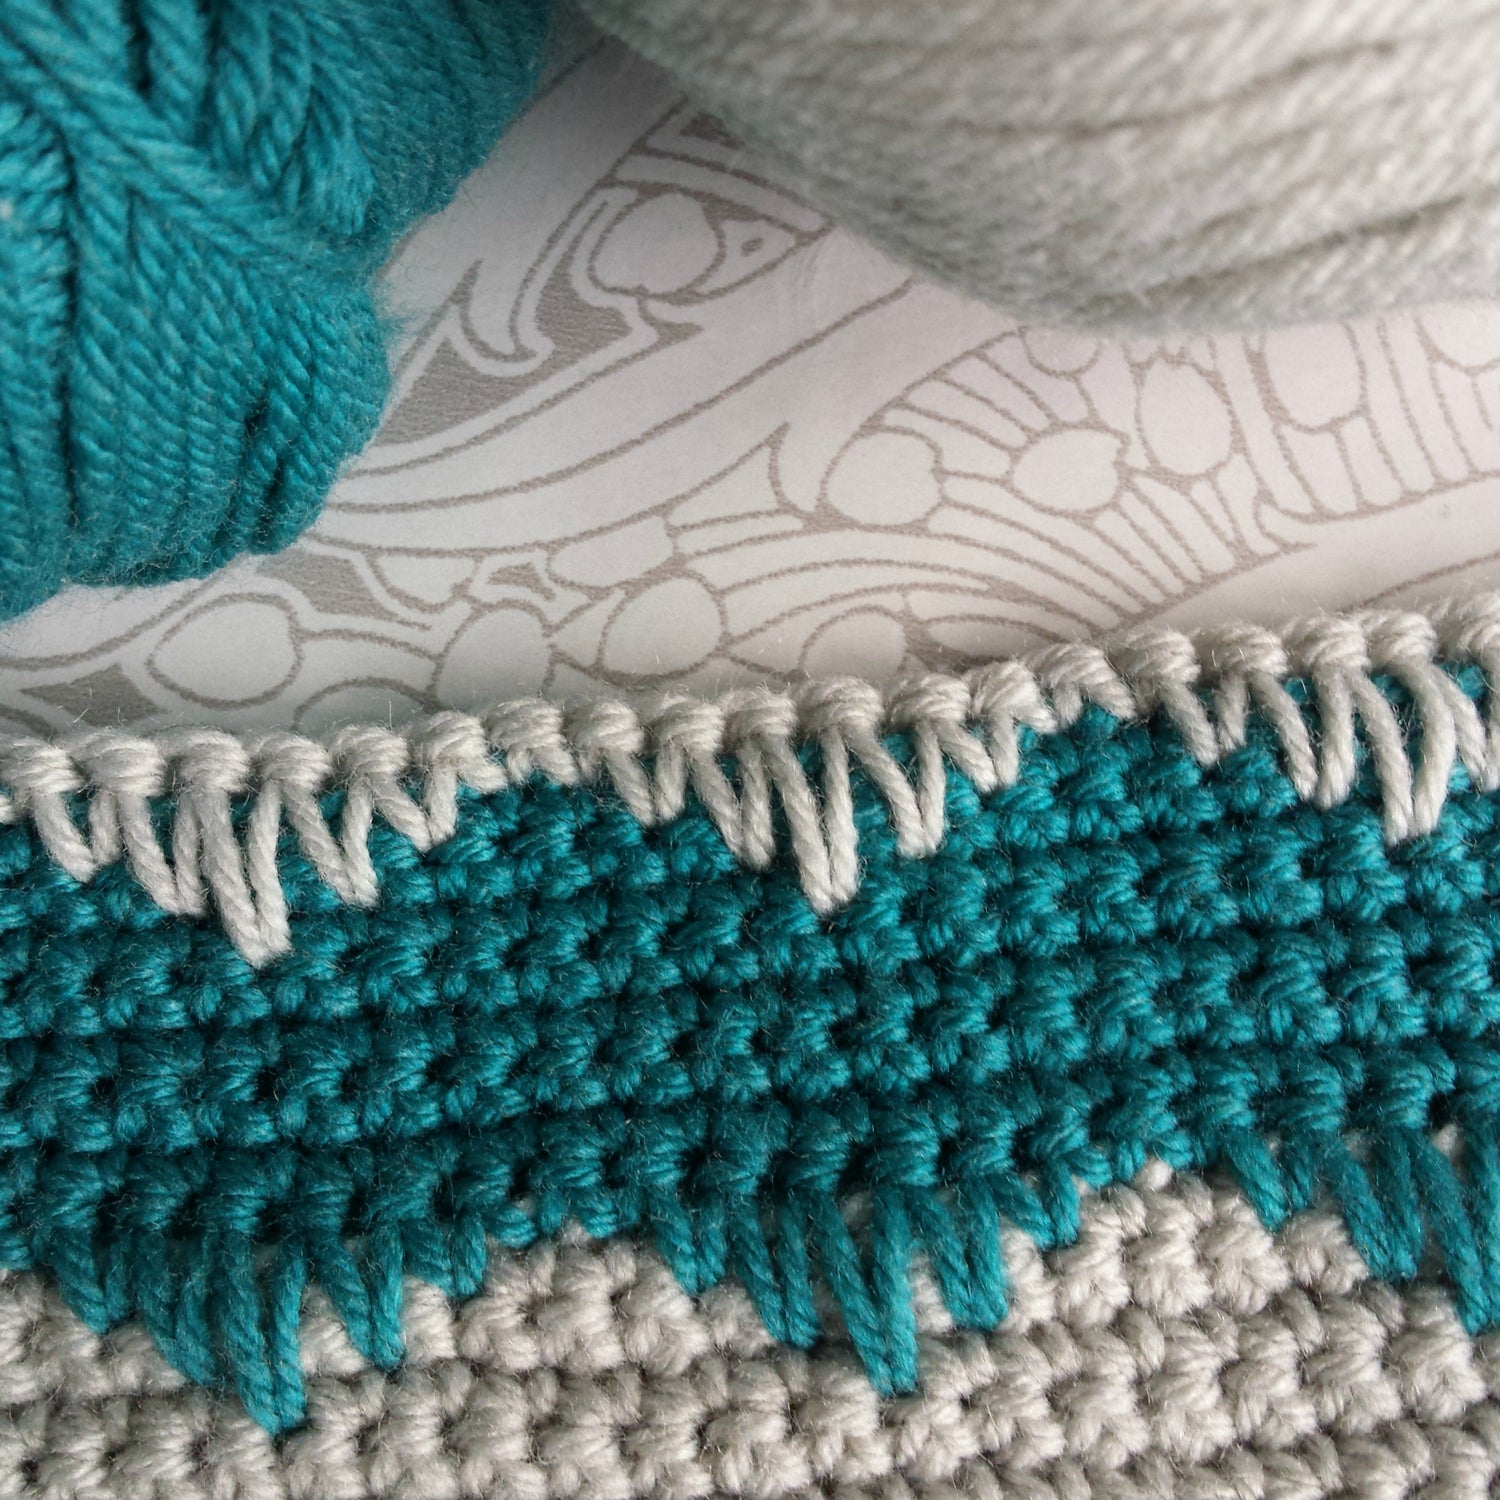 grey and turquoise chevron pattern using crochet spike stitches